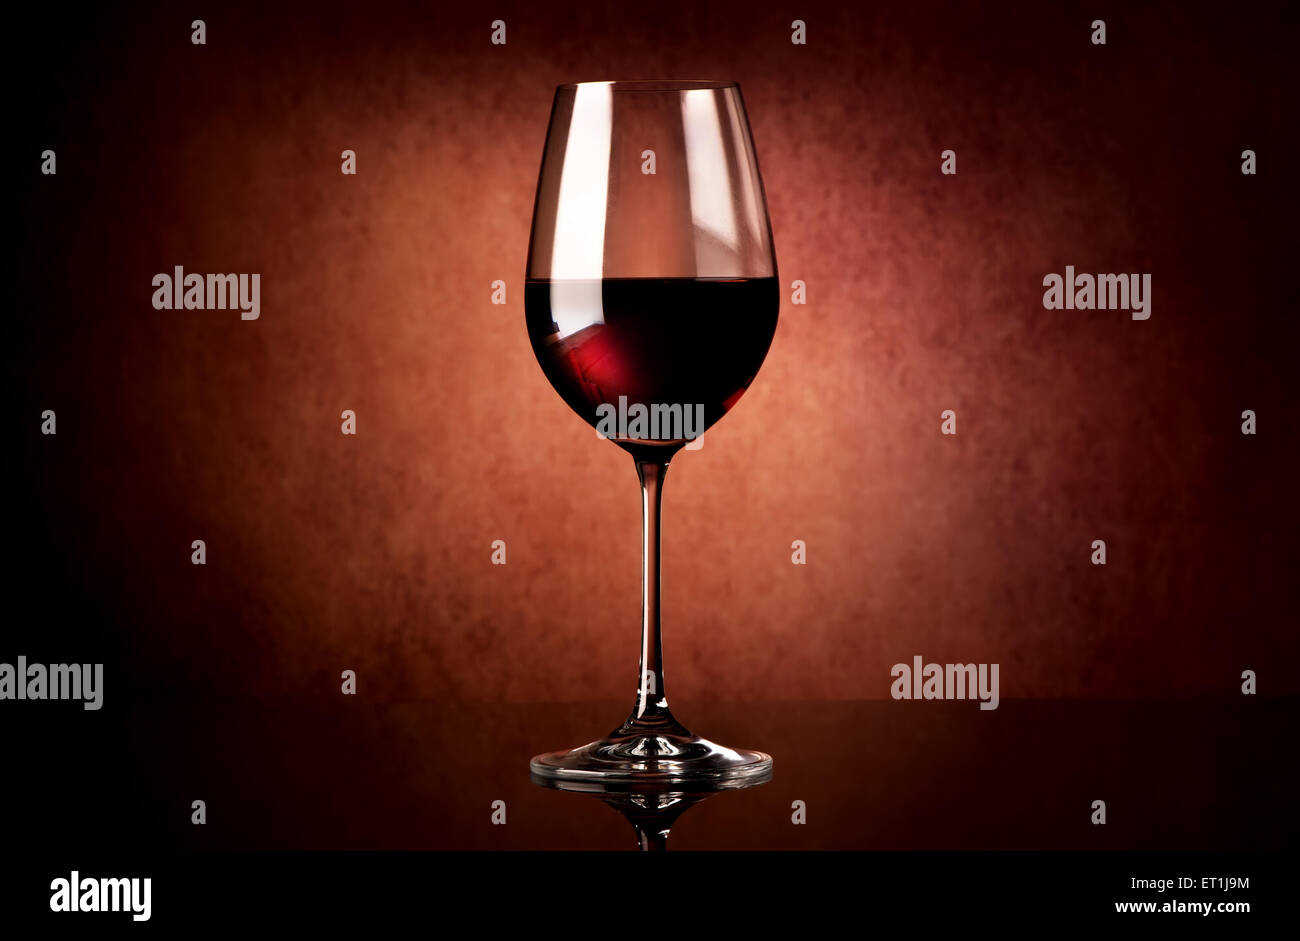 Red wine in glass on a vinous background Stock Photo